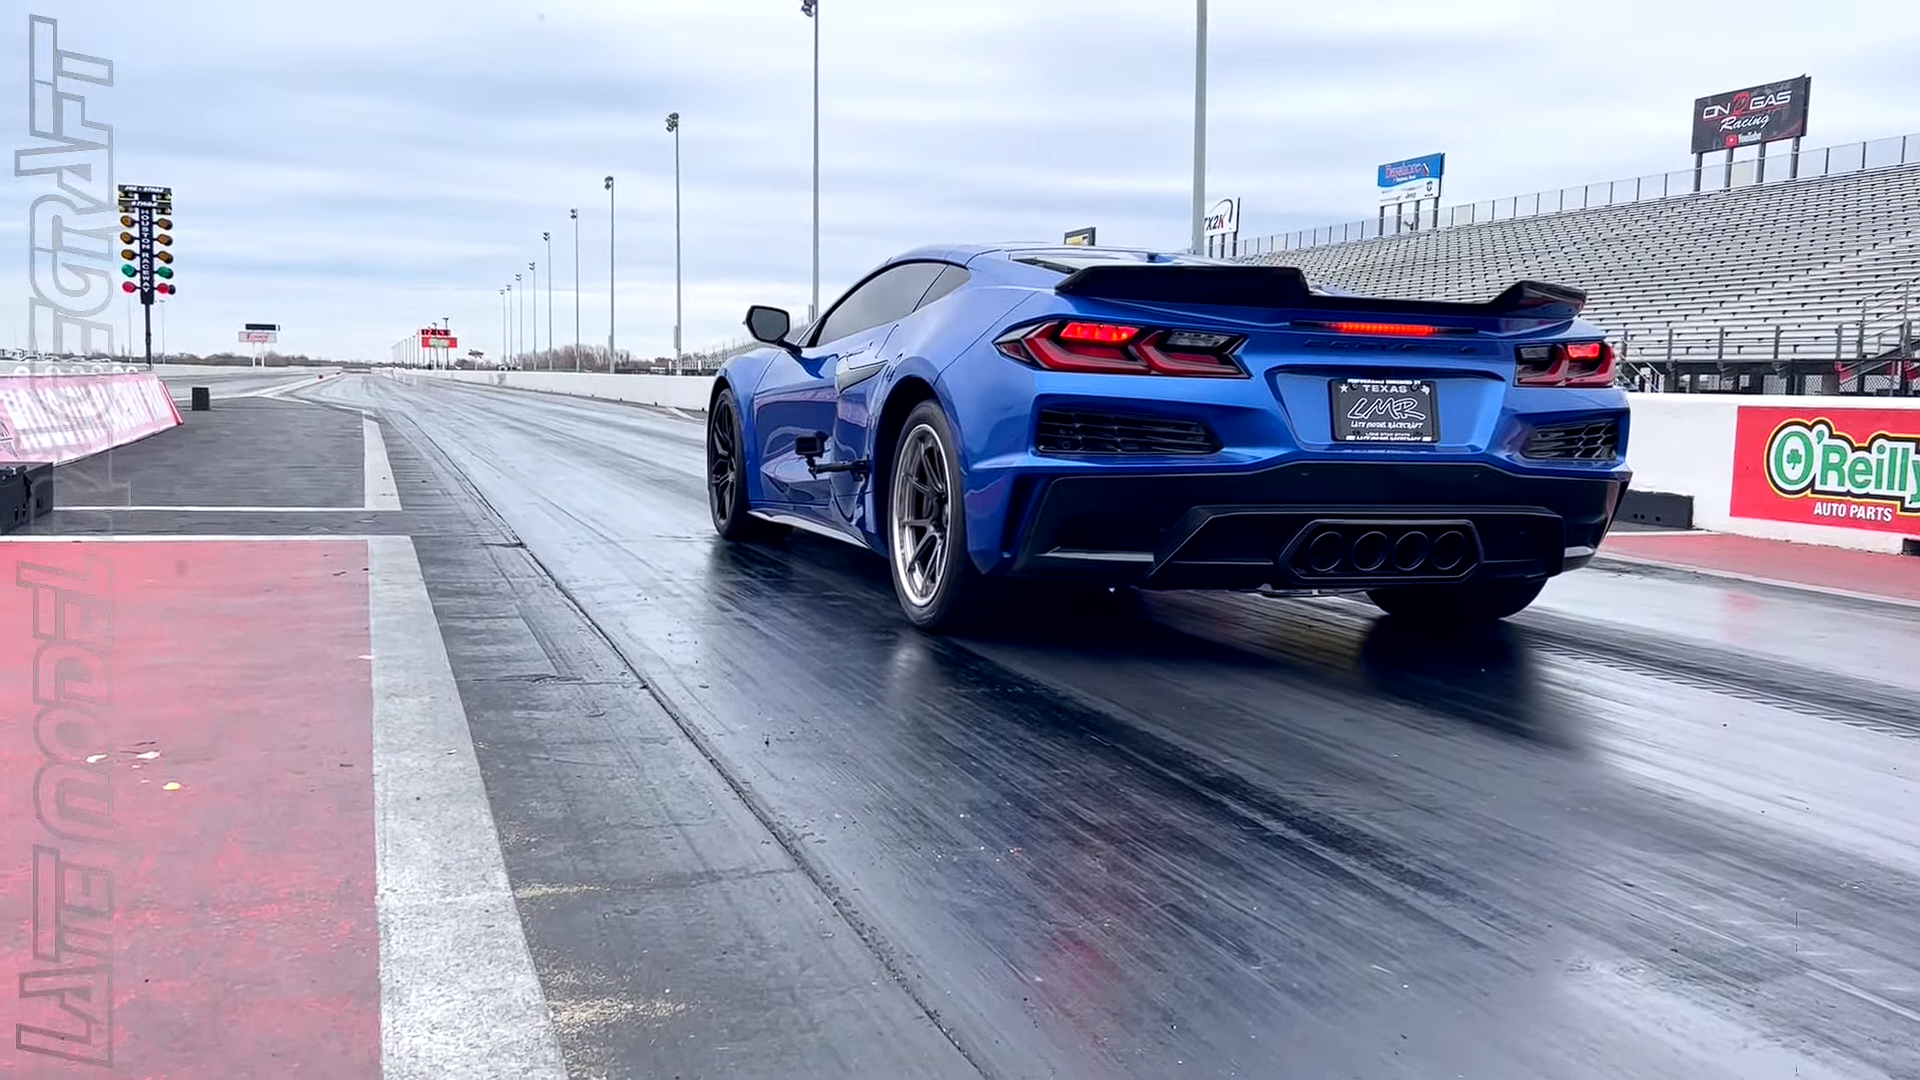 LMR Brings Their All-New C8 Z06 To The Dragstrip